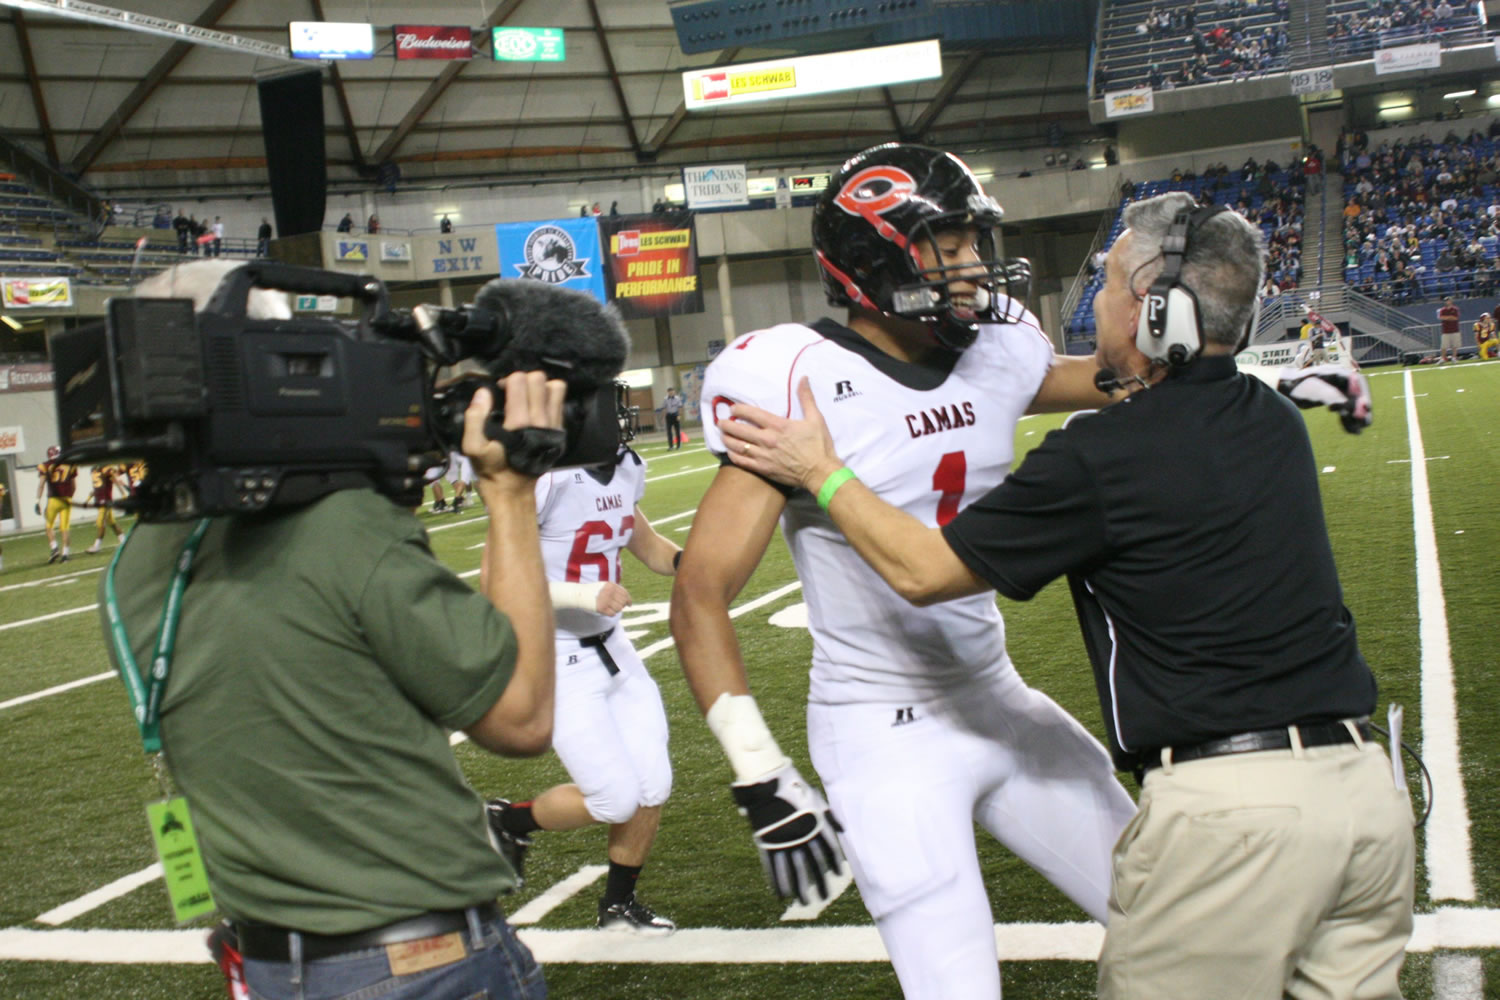 Camas head coach Jon Eagle embraces Jonathan Warner after he scores the first touchdown for th Papermakers at the Tacoma Dome.